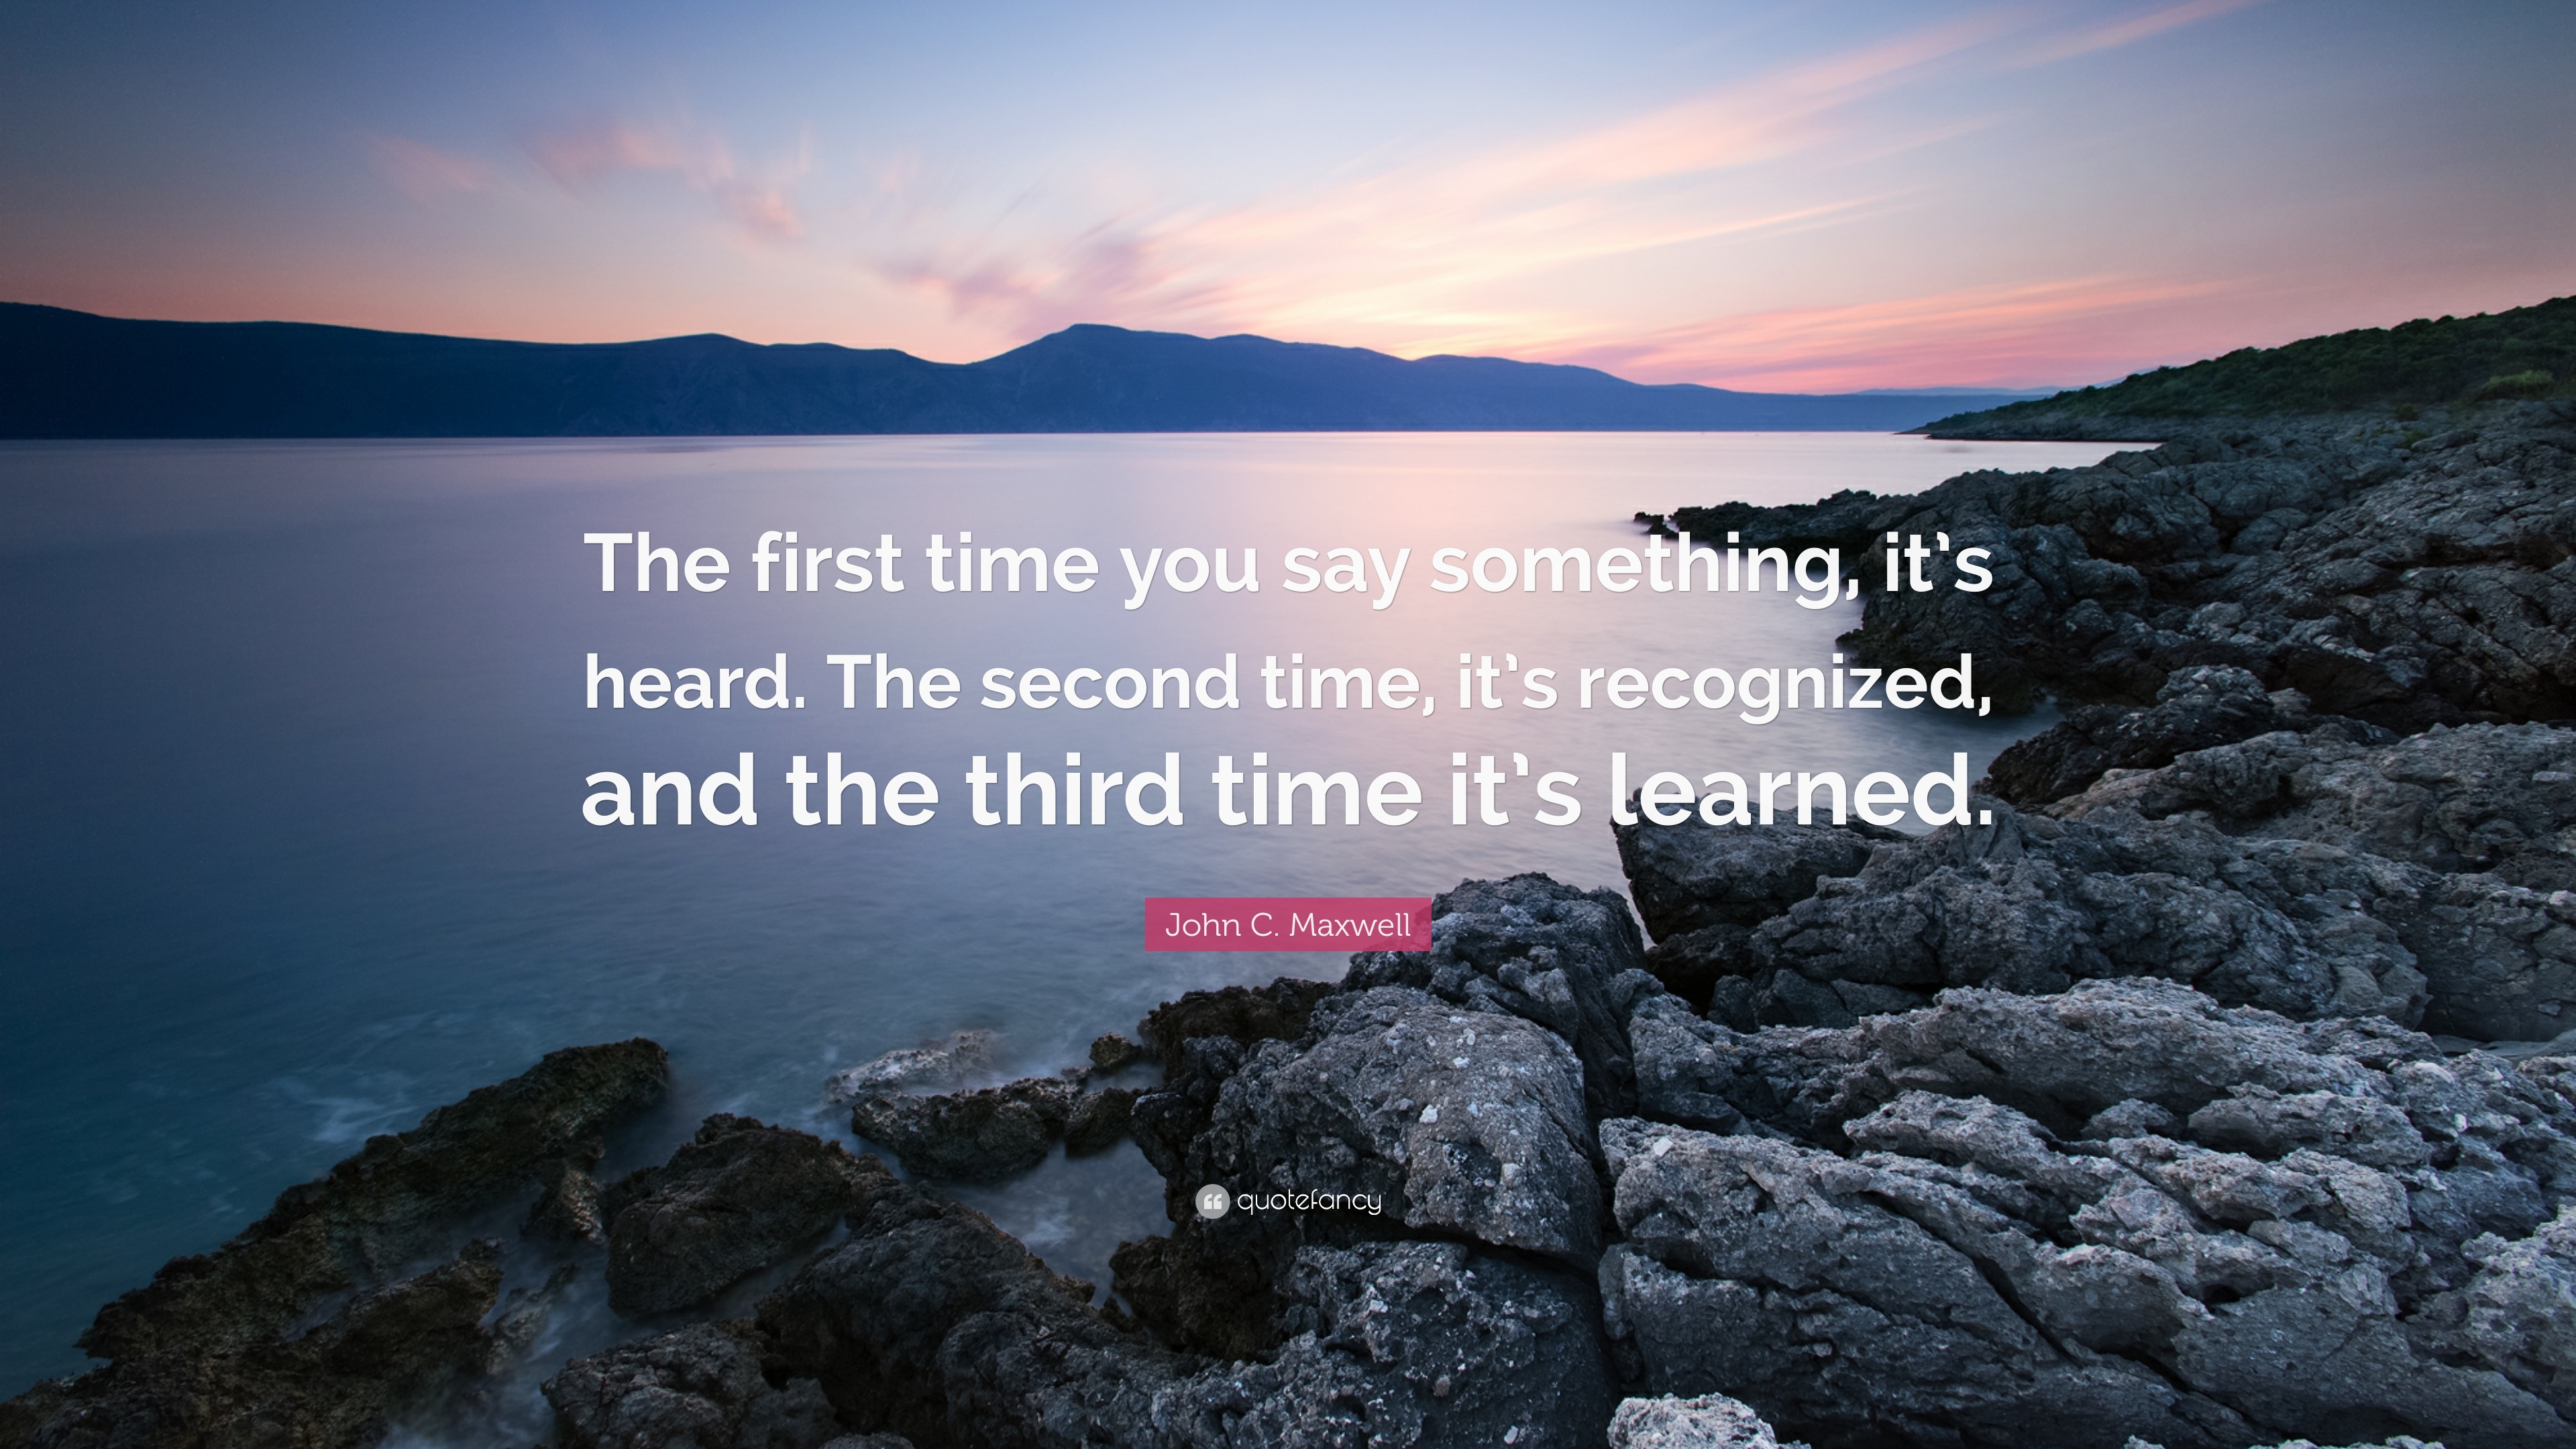 John C. Maxwell Quote: “The first time you say something, it’s heard ...